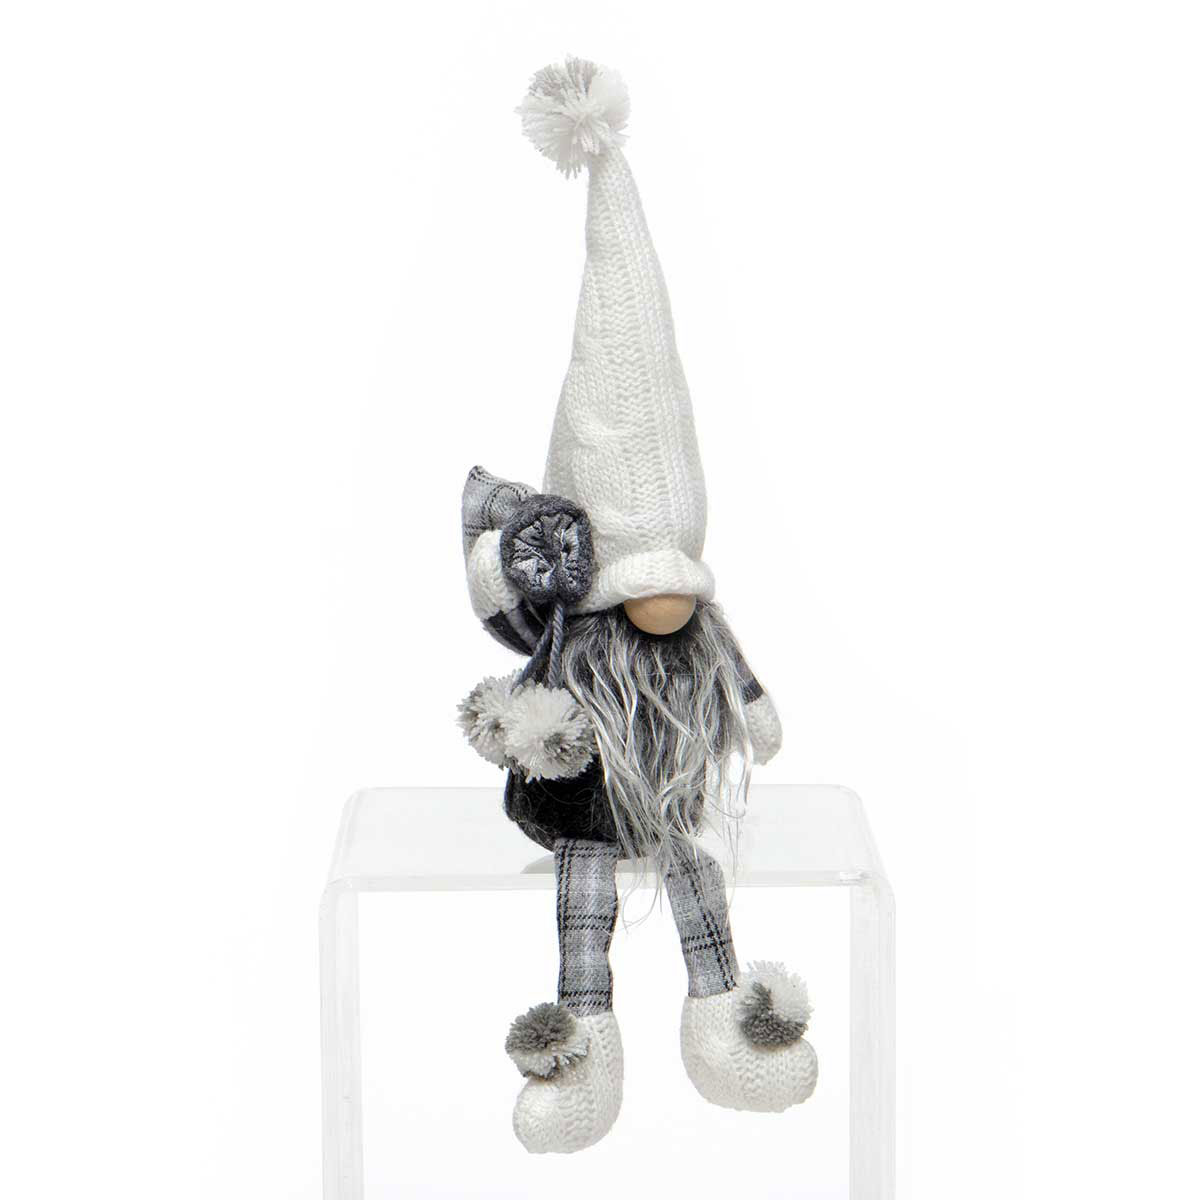 Pom-Pom Gnome Grey/Cream with Wired Cable Knit Sweater Hat